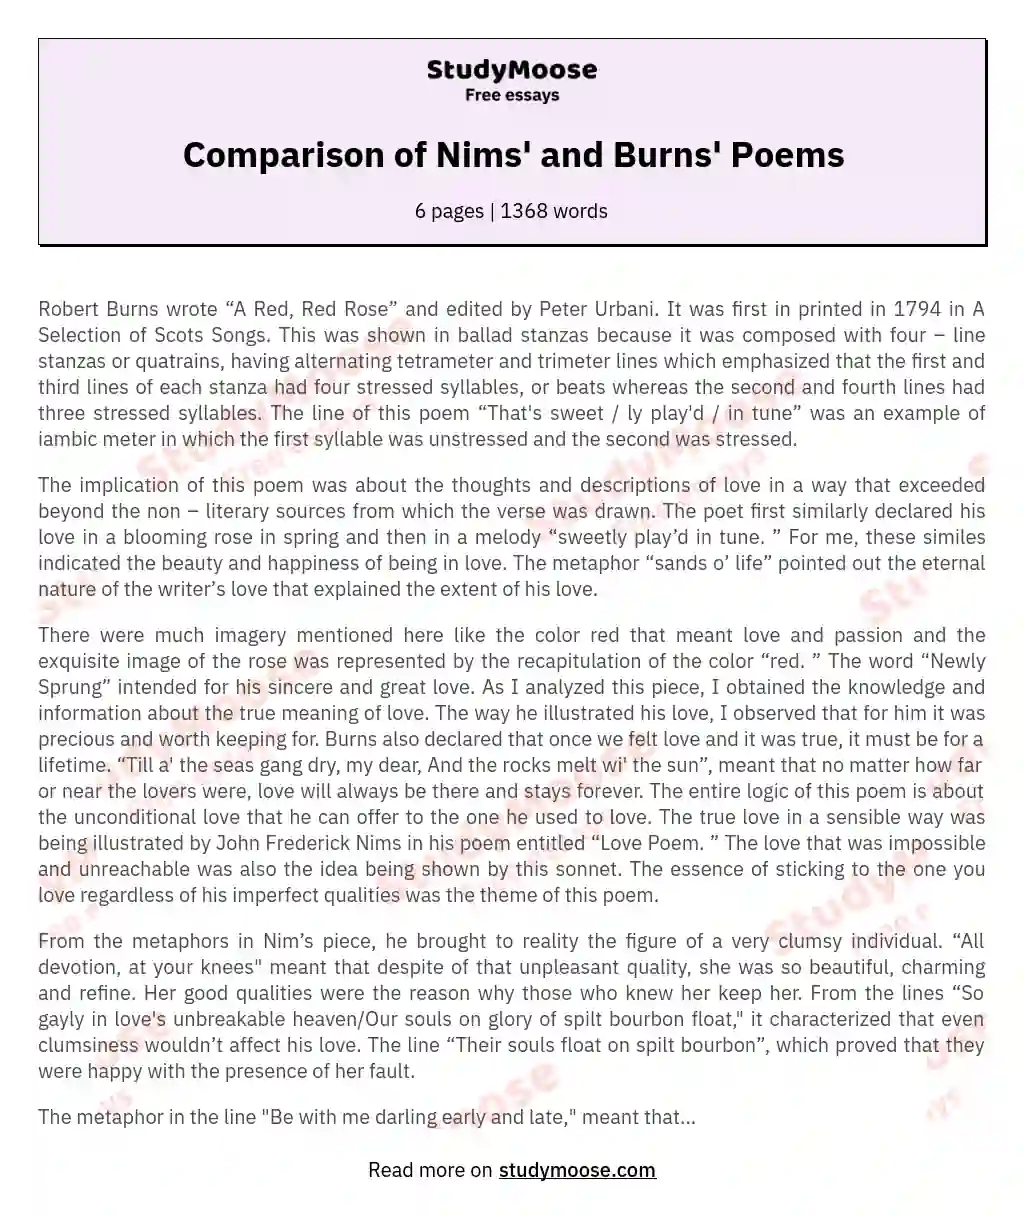 Comparison of Nims' and Burns' Poems essay